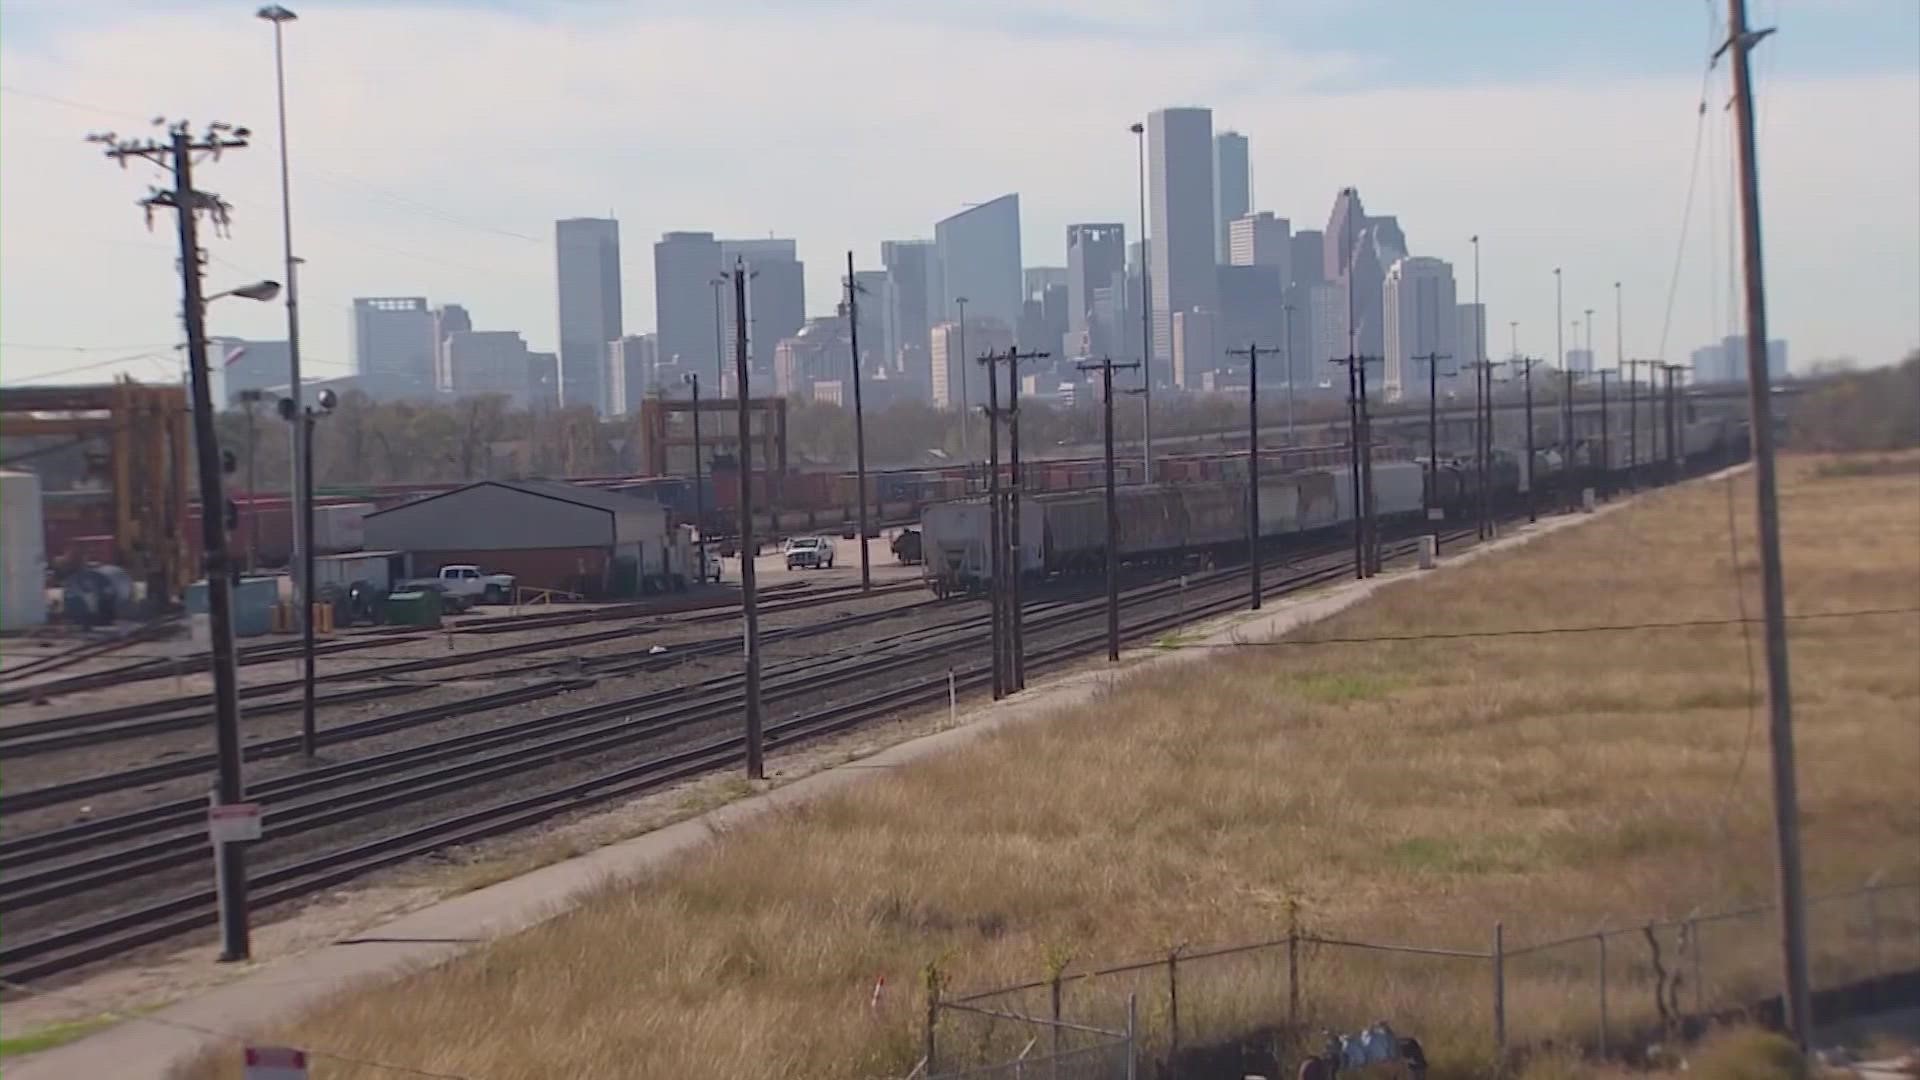 The city of Houston and the Harris Co. attorney intend to file a lawsuit against Union Pacific over a toxic site allegedly causing cancer in nearby communities.